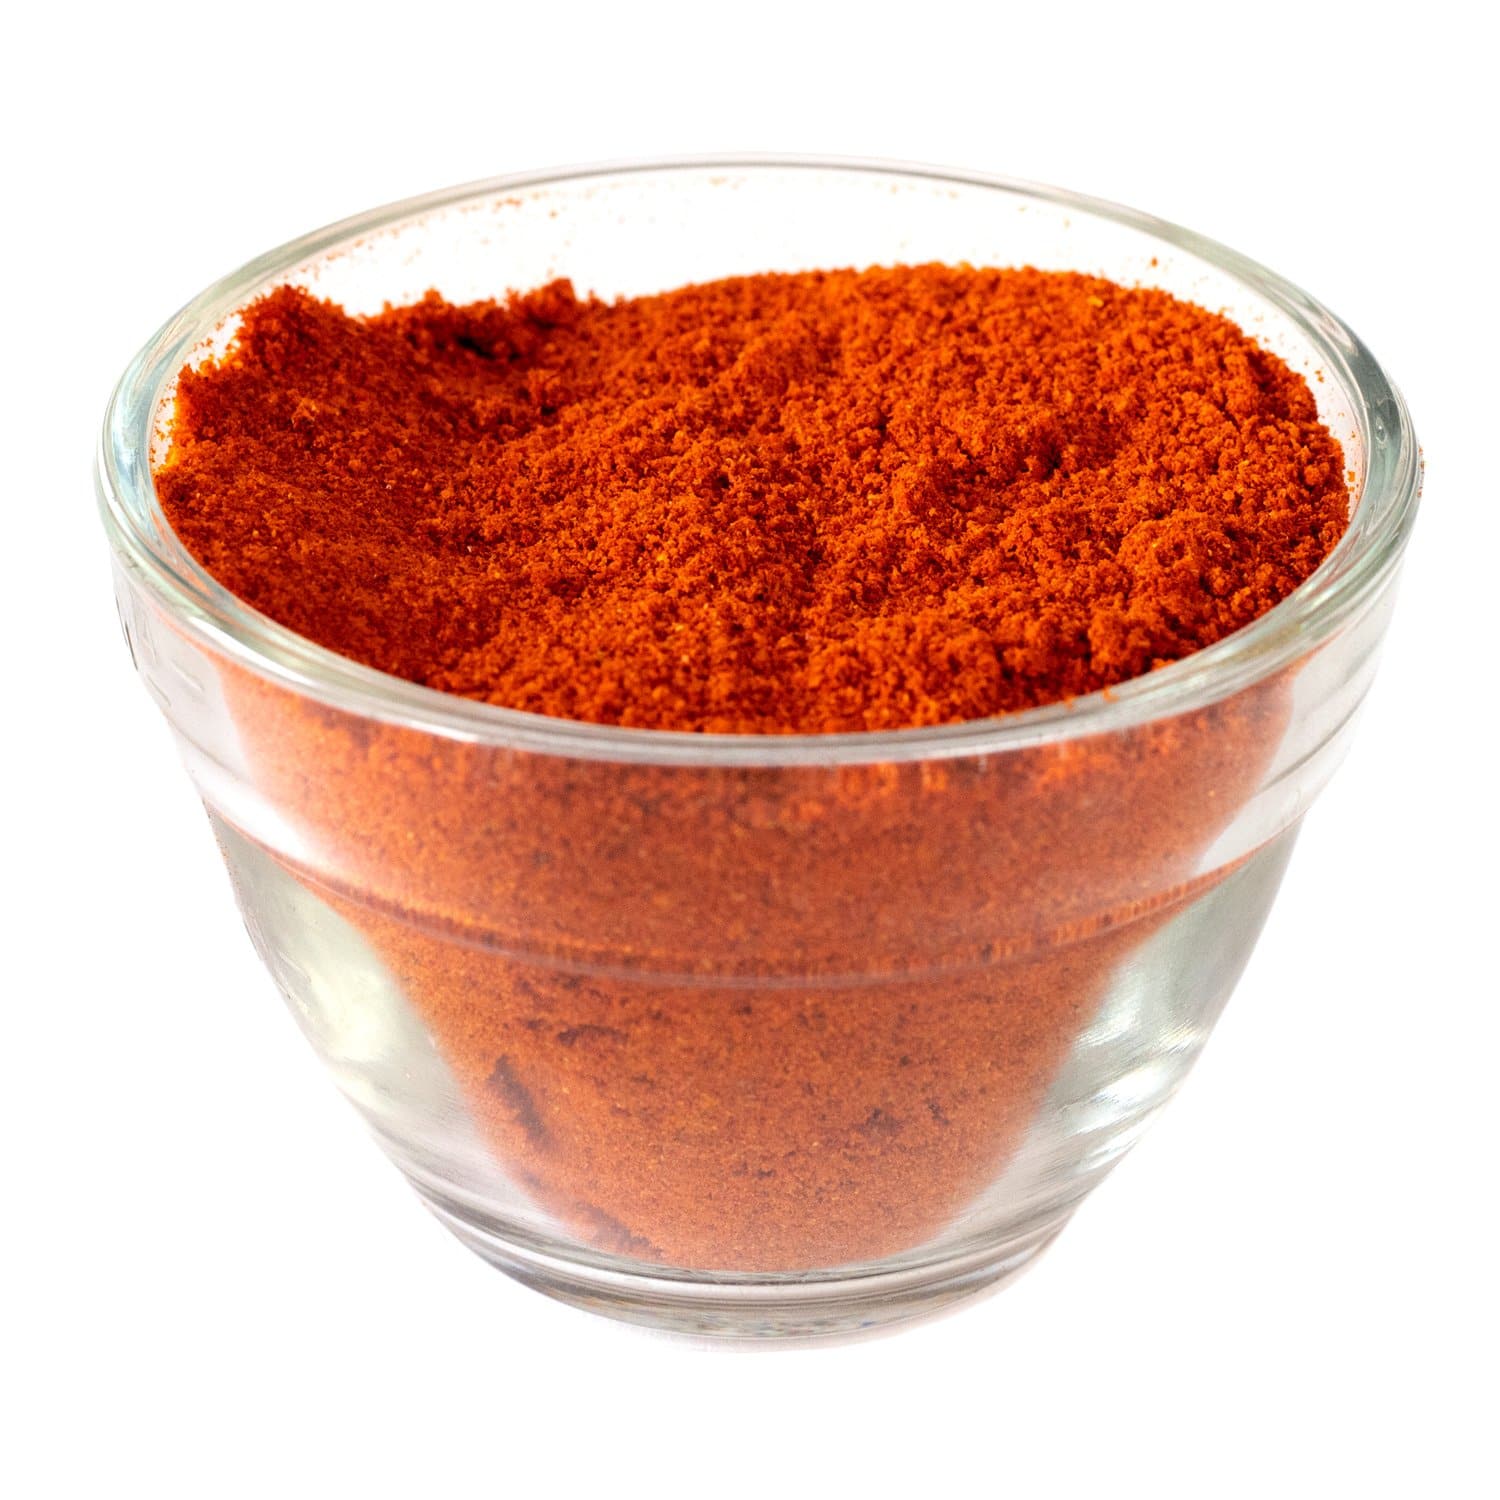 A glass bowl filled with Red Chile Powder, isolated on a white background.